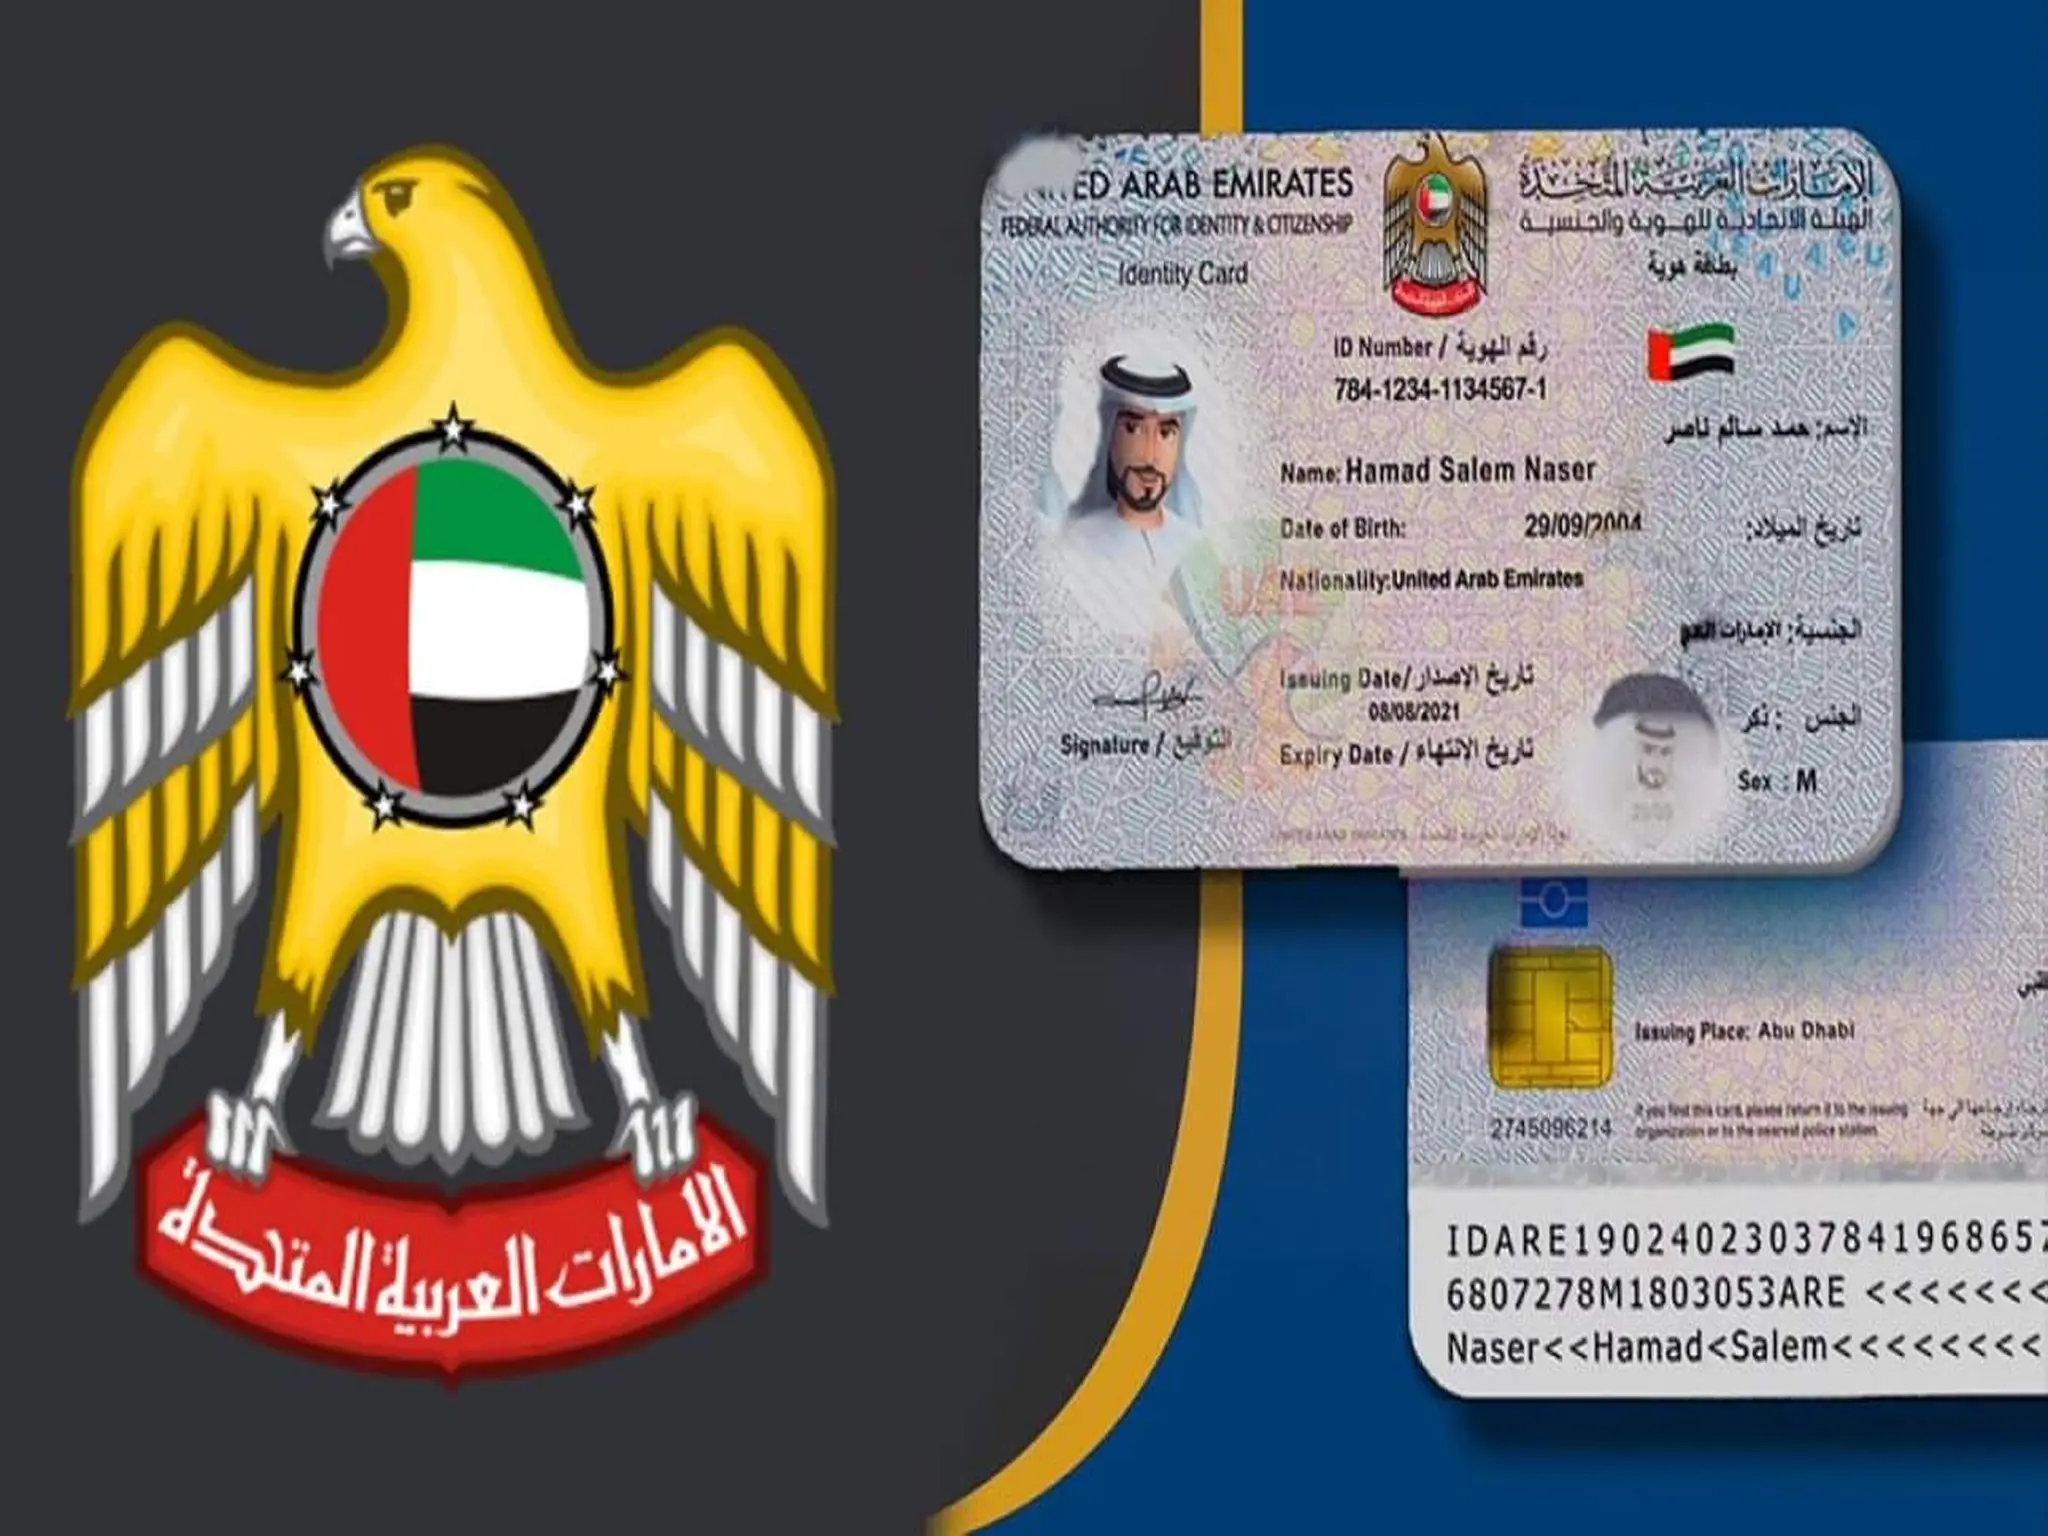 The Emirates Digital Government announces four steps in the event of loss, theft or damage of the ID card